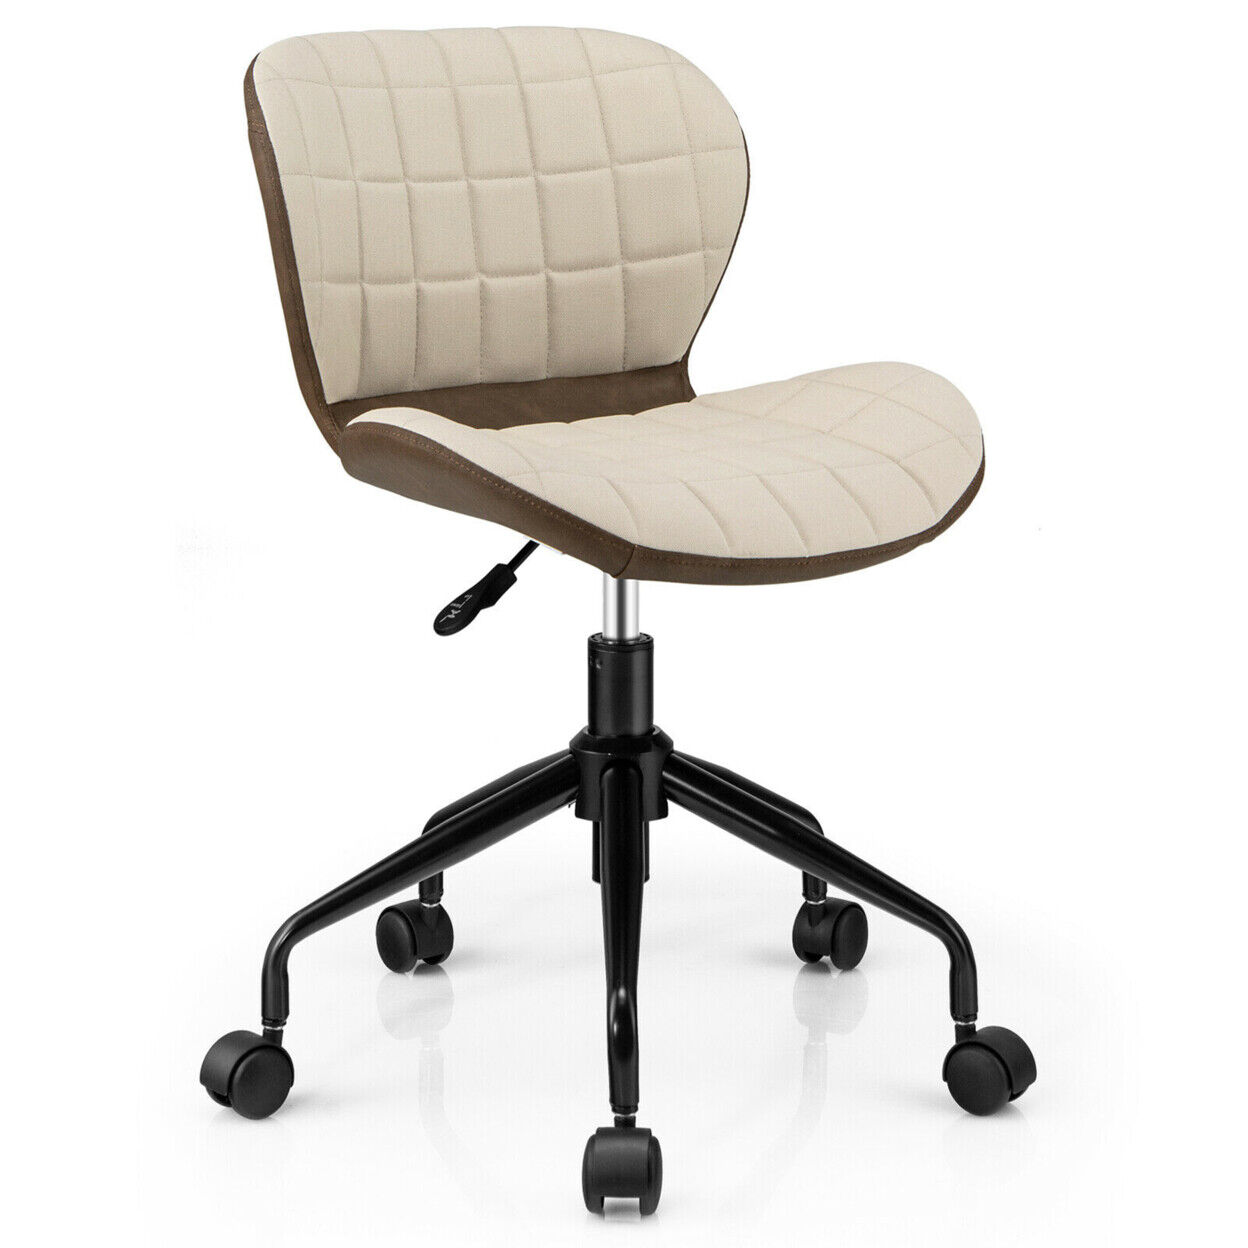 Gymax Mid Back Home Office Chair Adjustable Swivel Linen And Pu Leather Task Being Patient